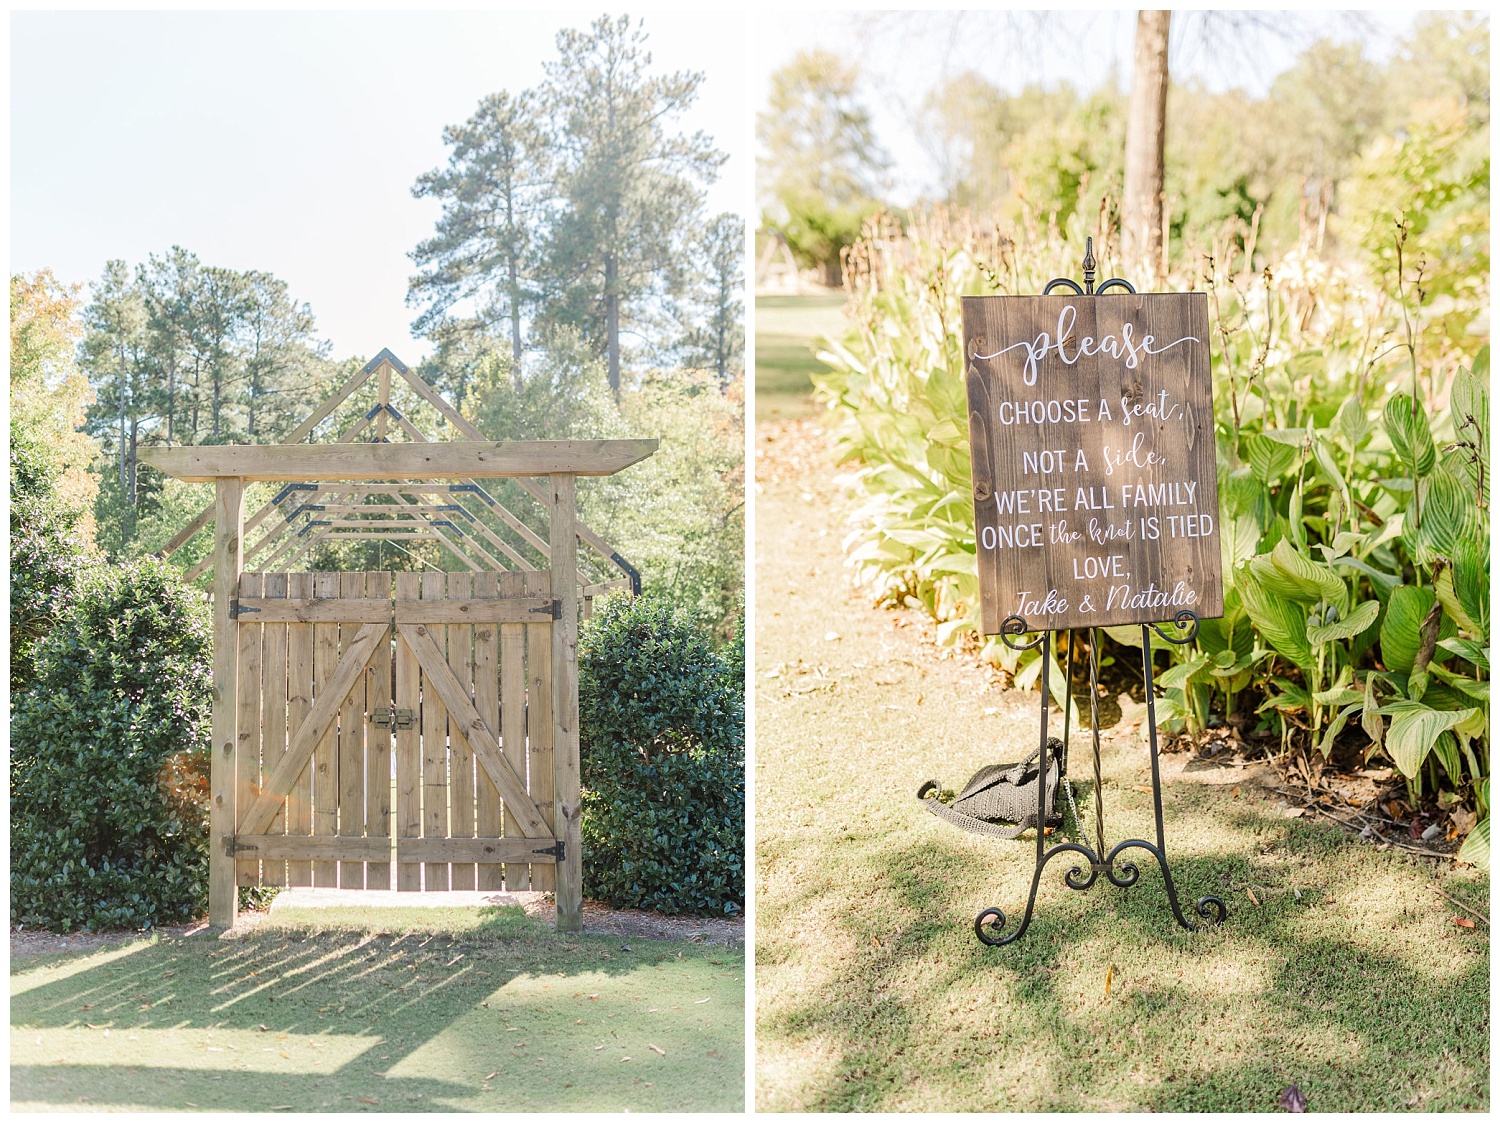 details at wedding ceremony at Chapel Hill Carriage House